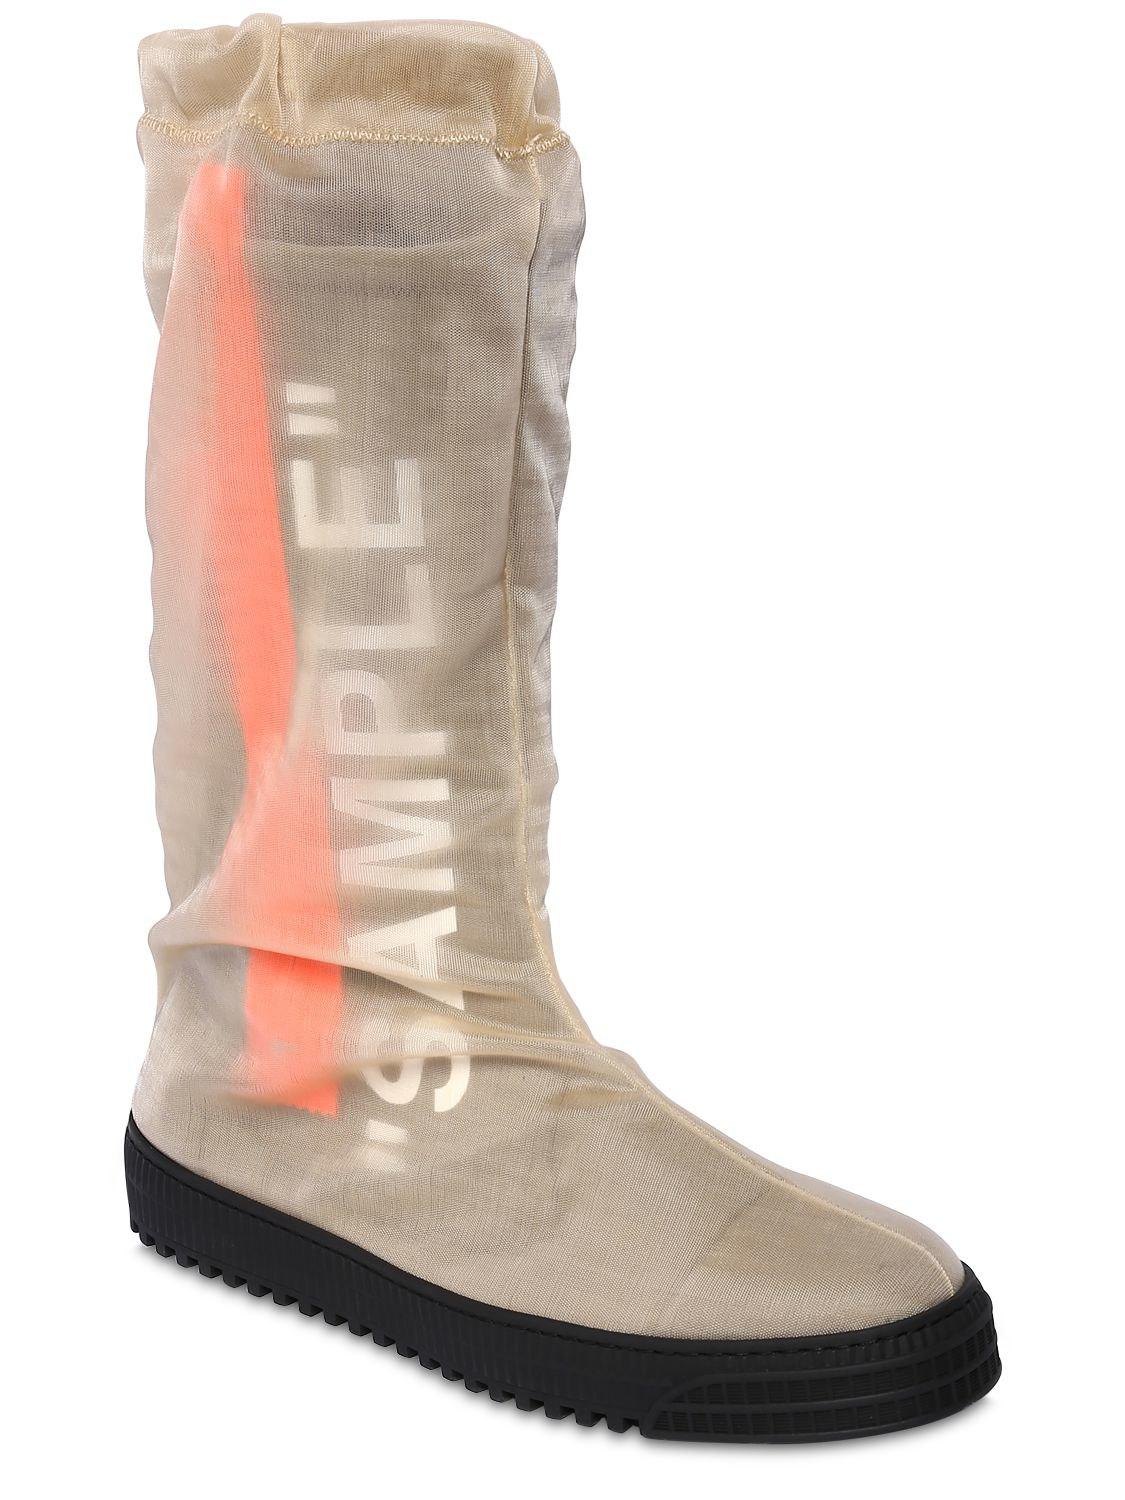 off white sample boots